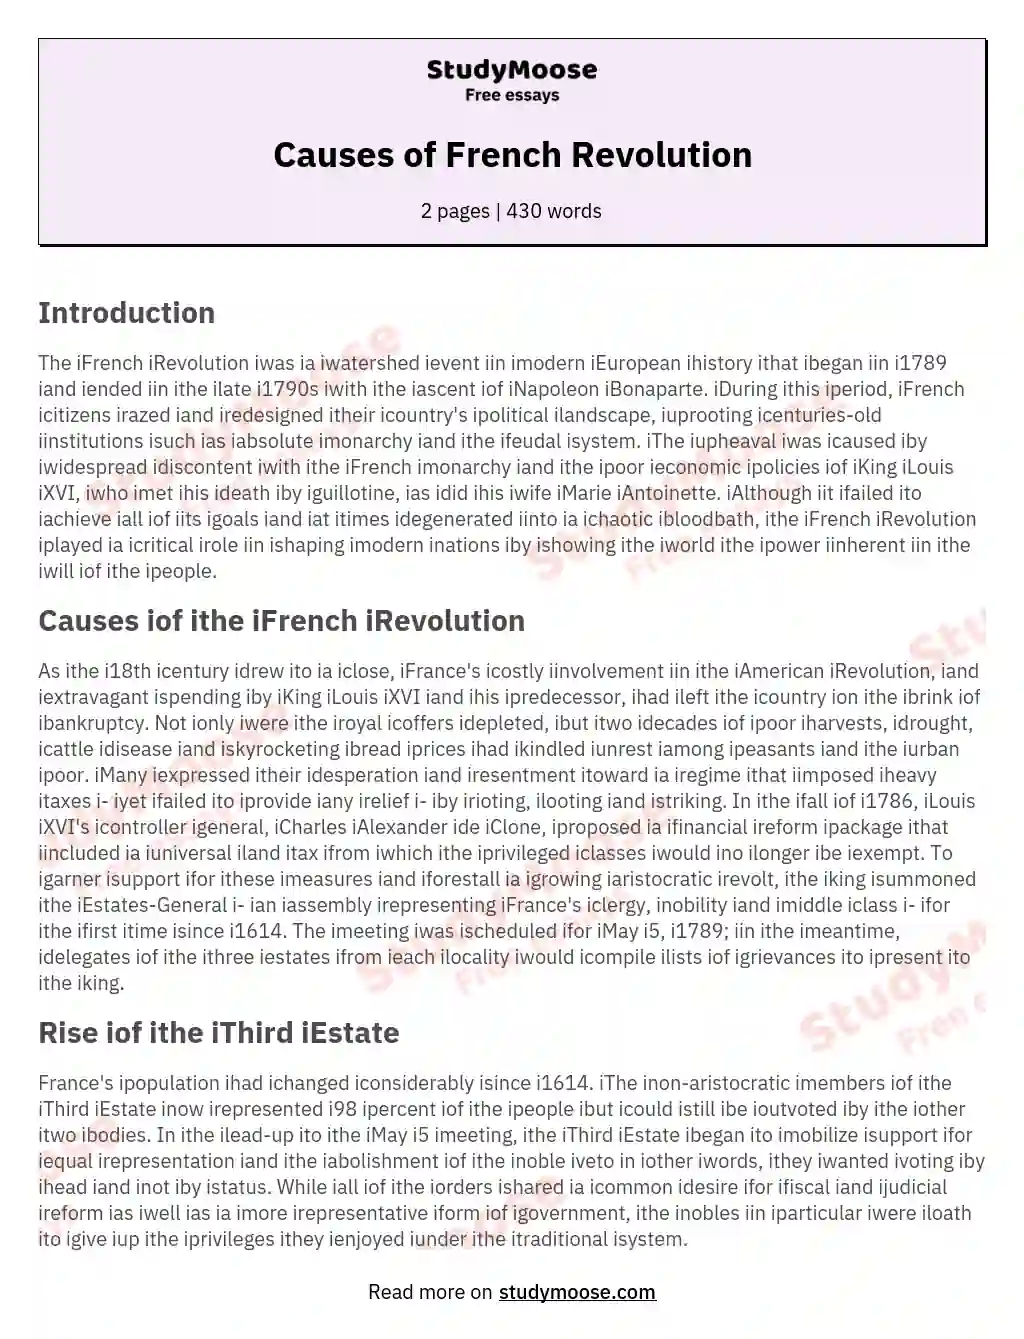 Causes of French Revolution essay